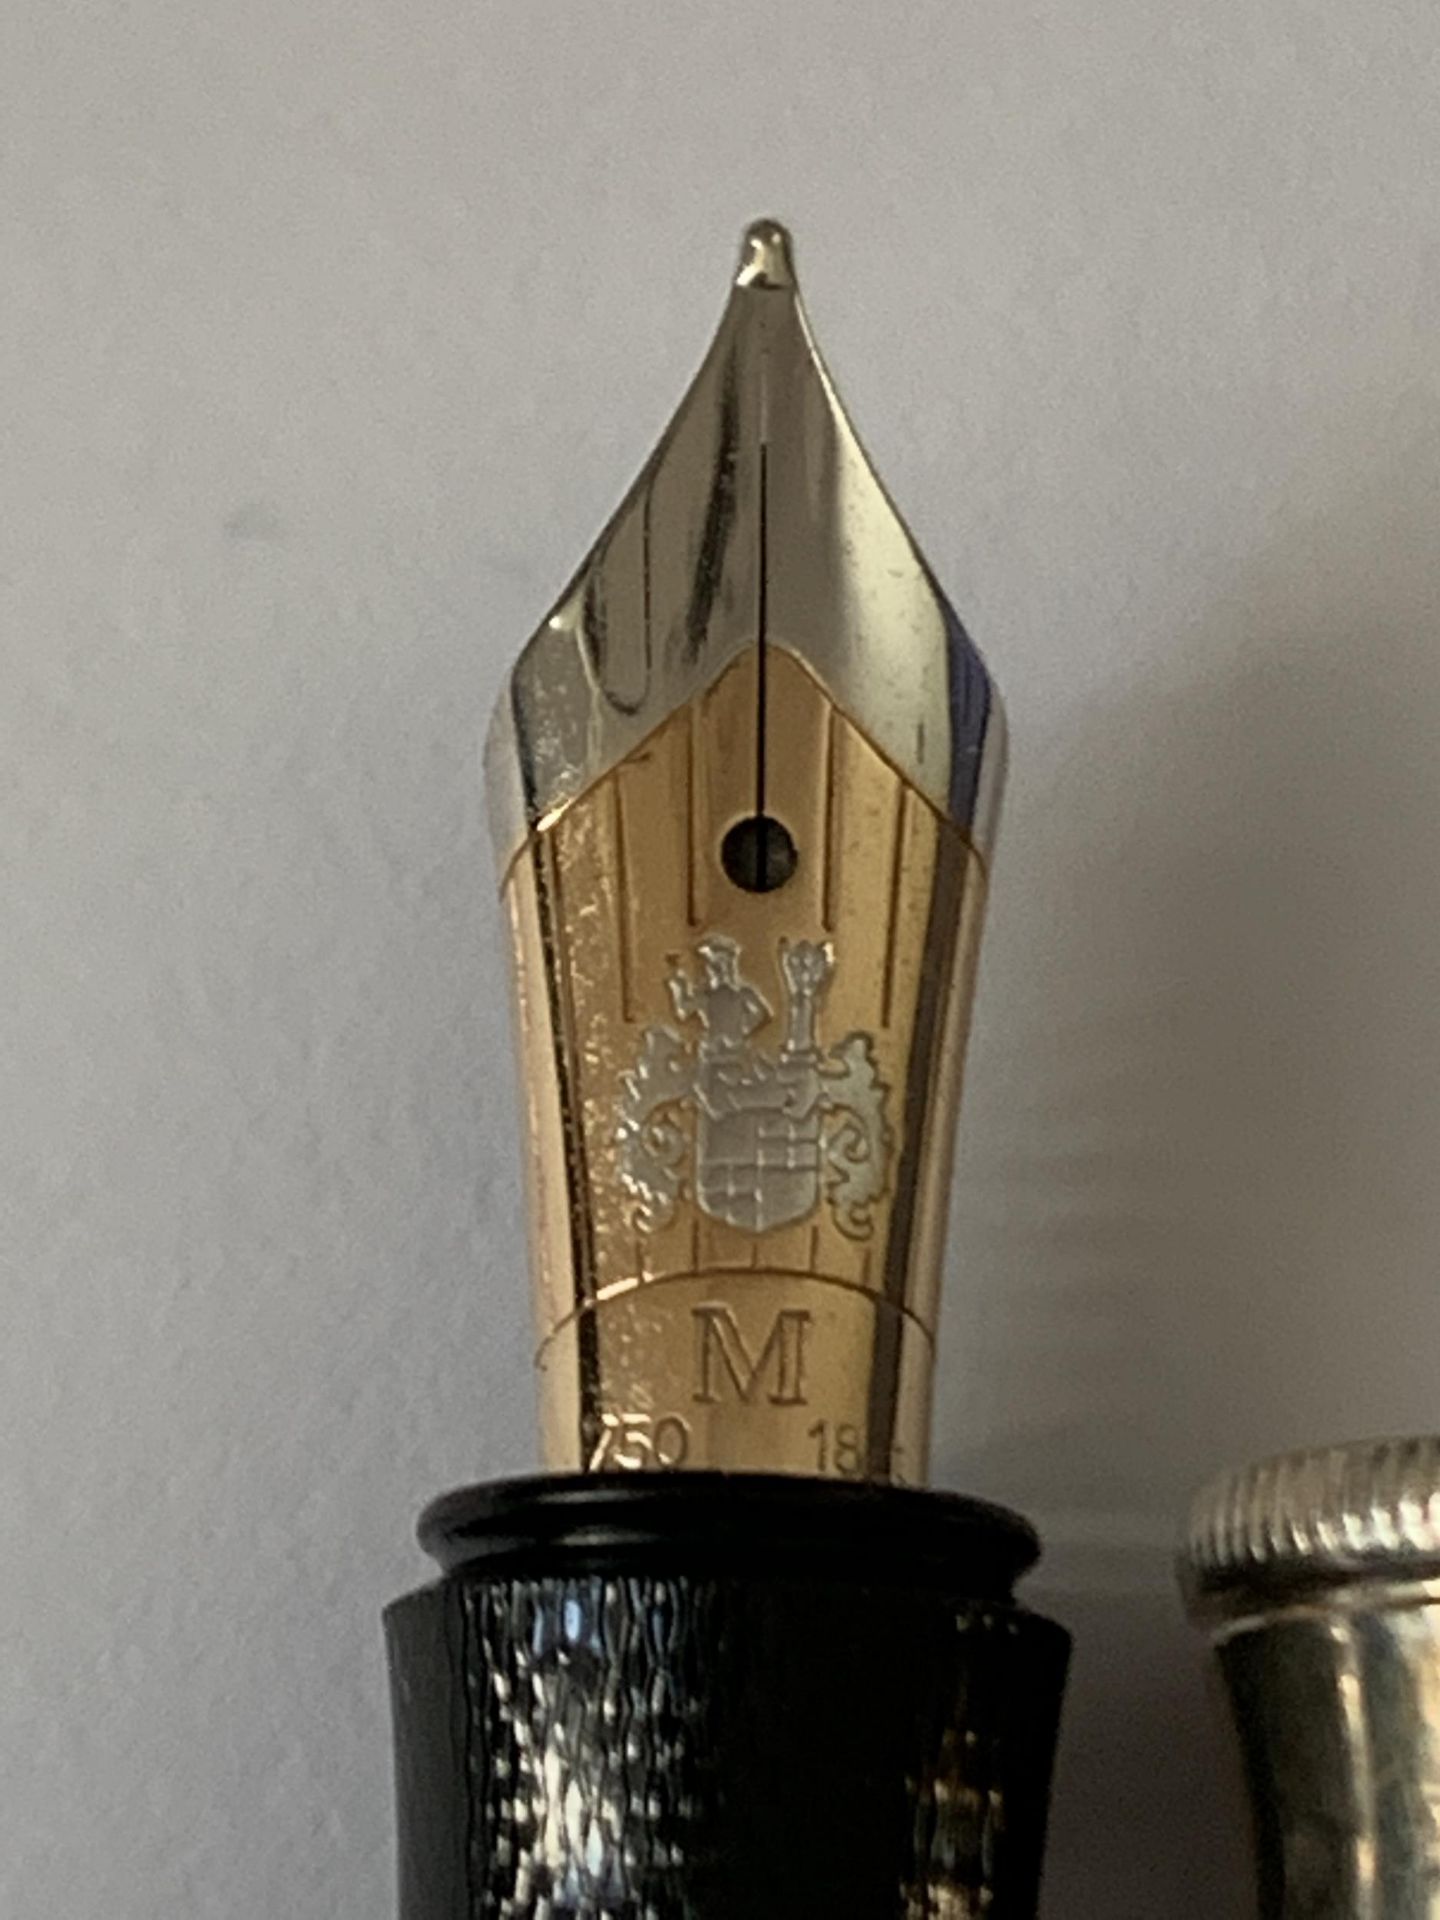 A GRAF VON FABER CASTELL FOUNTAIN PEN WITH AN 18 CARAT GOLD M NIB - Image 5 of 5